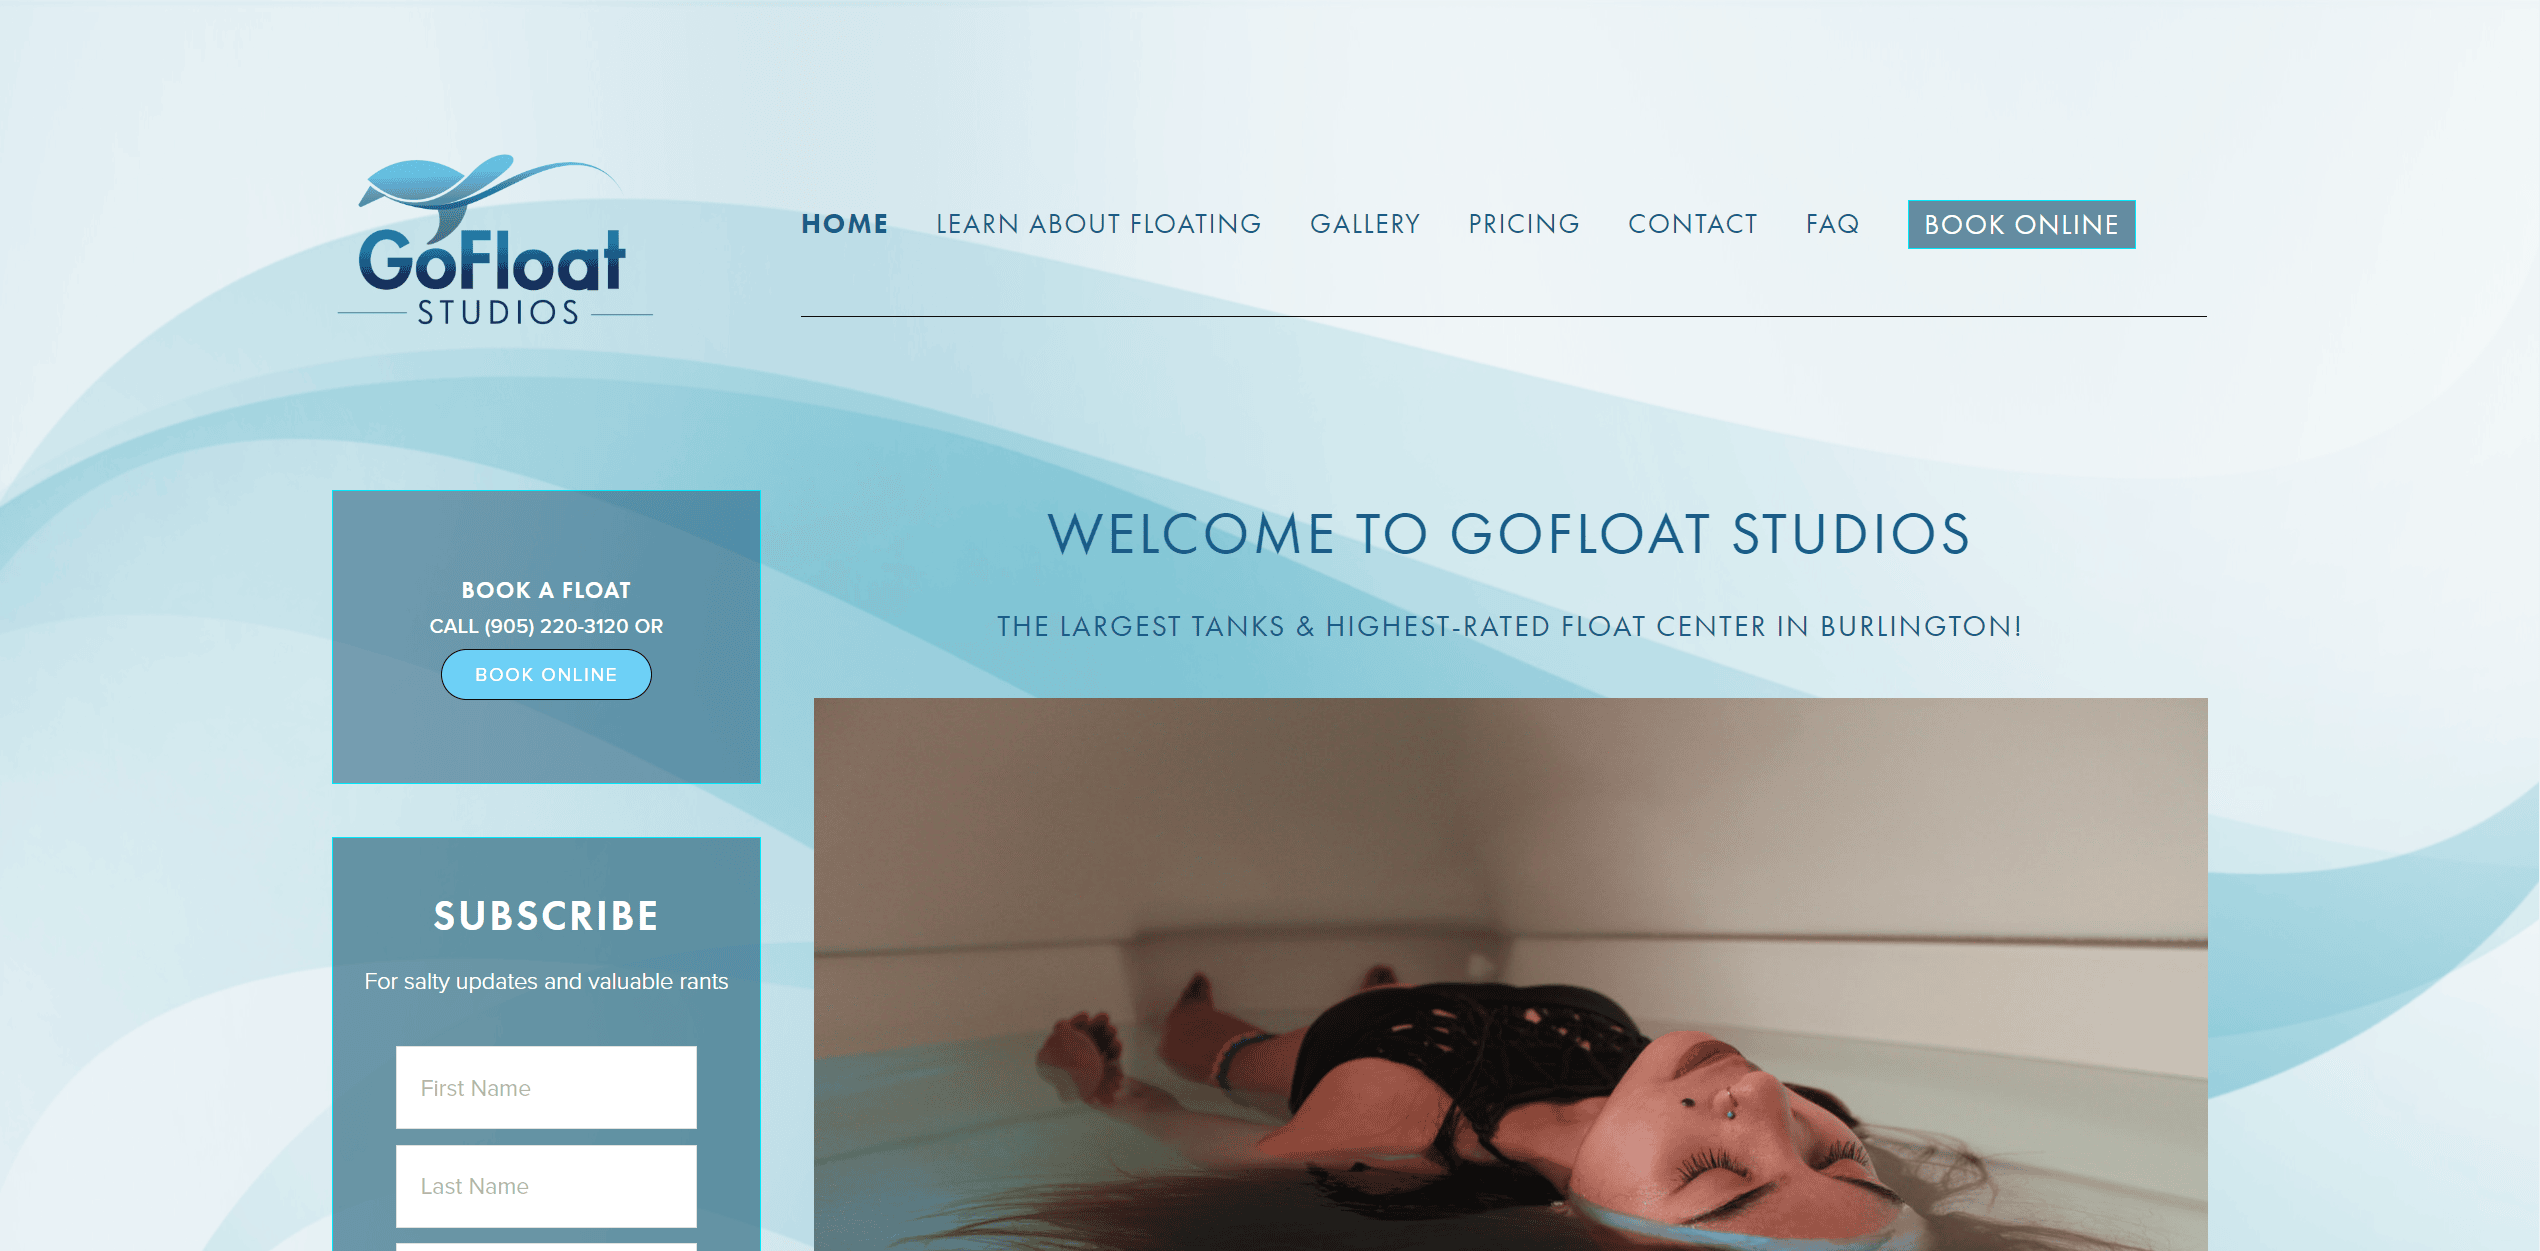 Home page of GoFloat Studios.